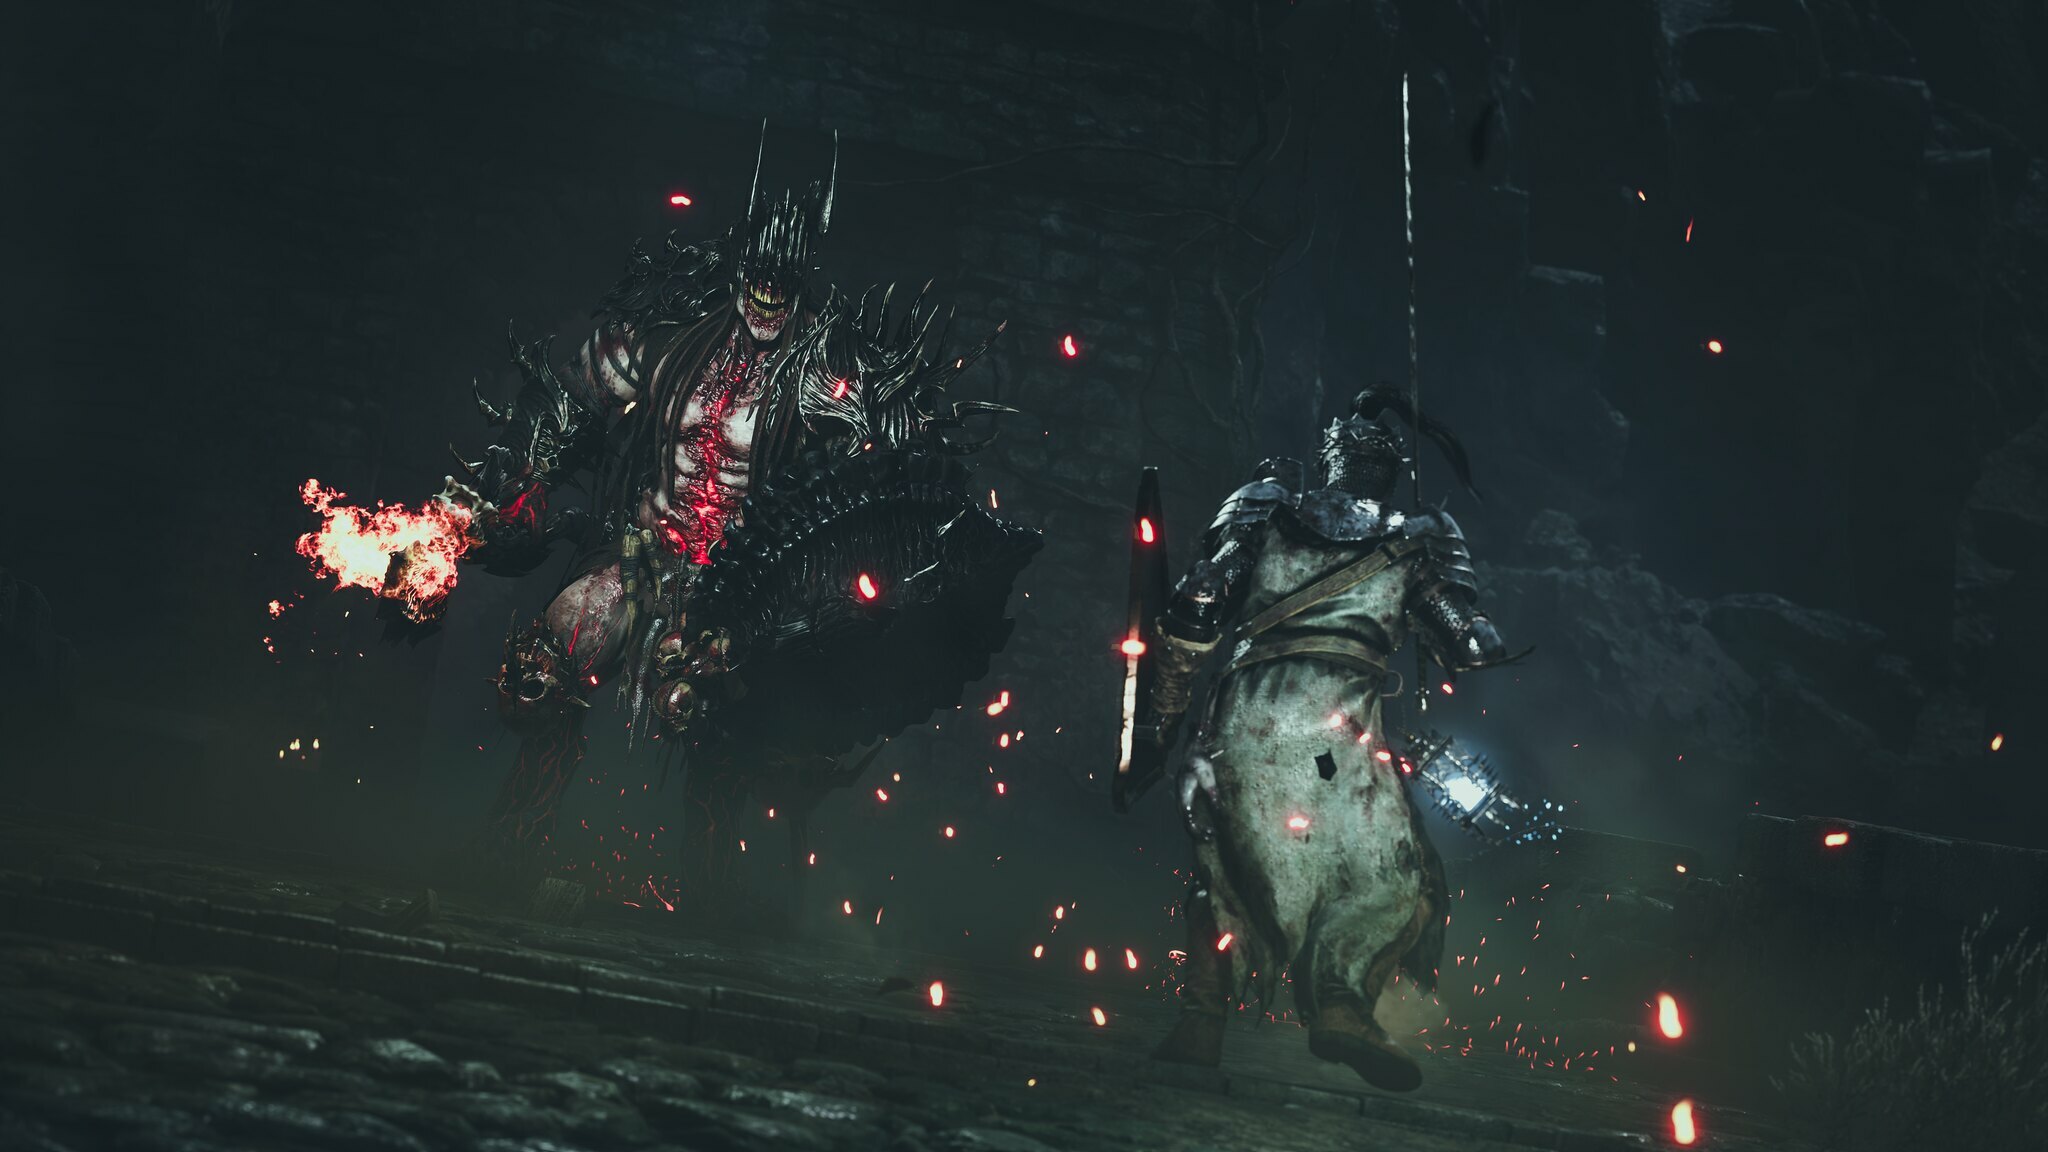 LORDS OF THE FALLEN on X: Patch v.1.1.224 is now live for Steam